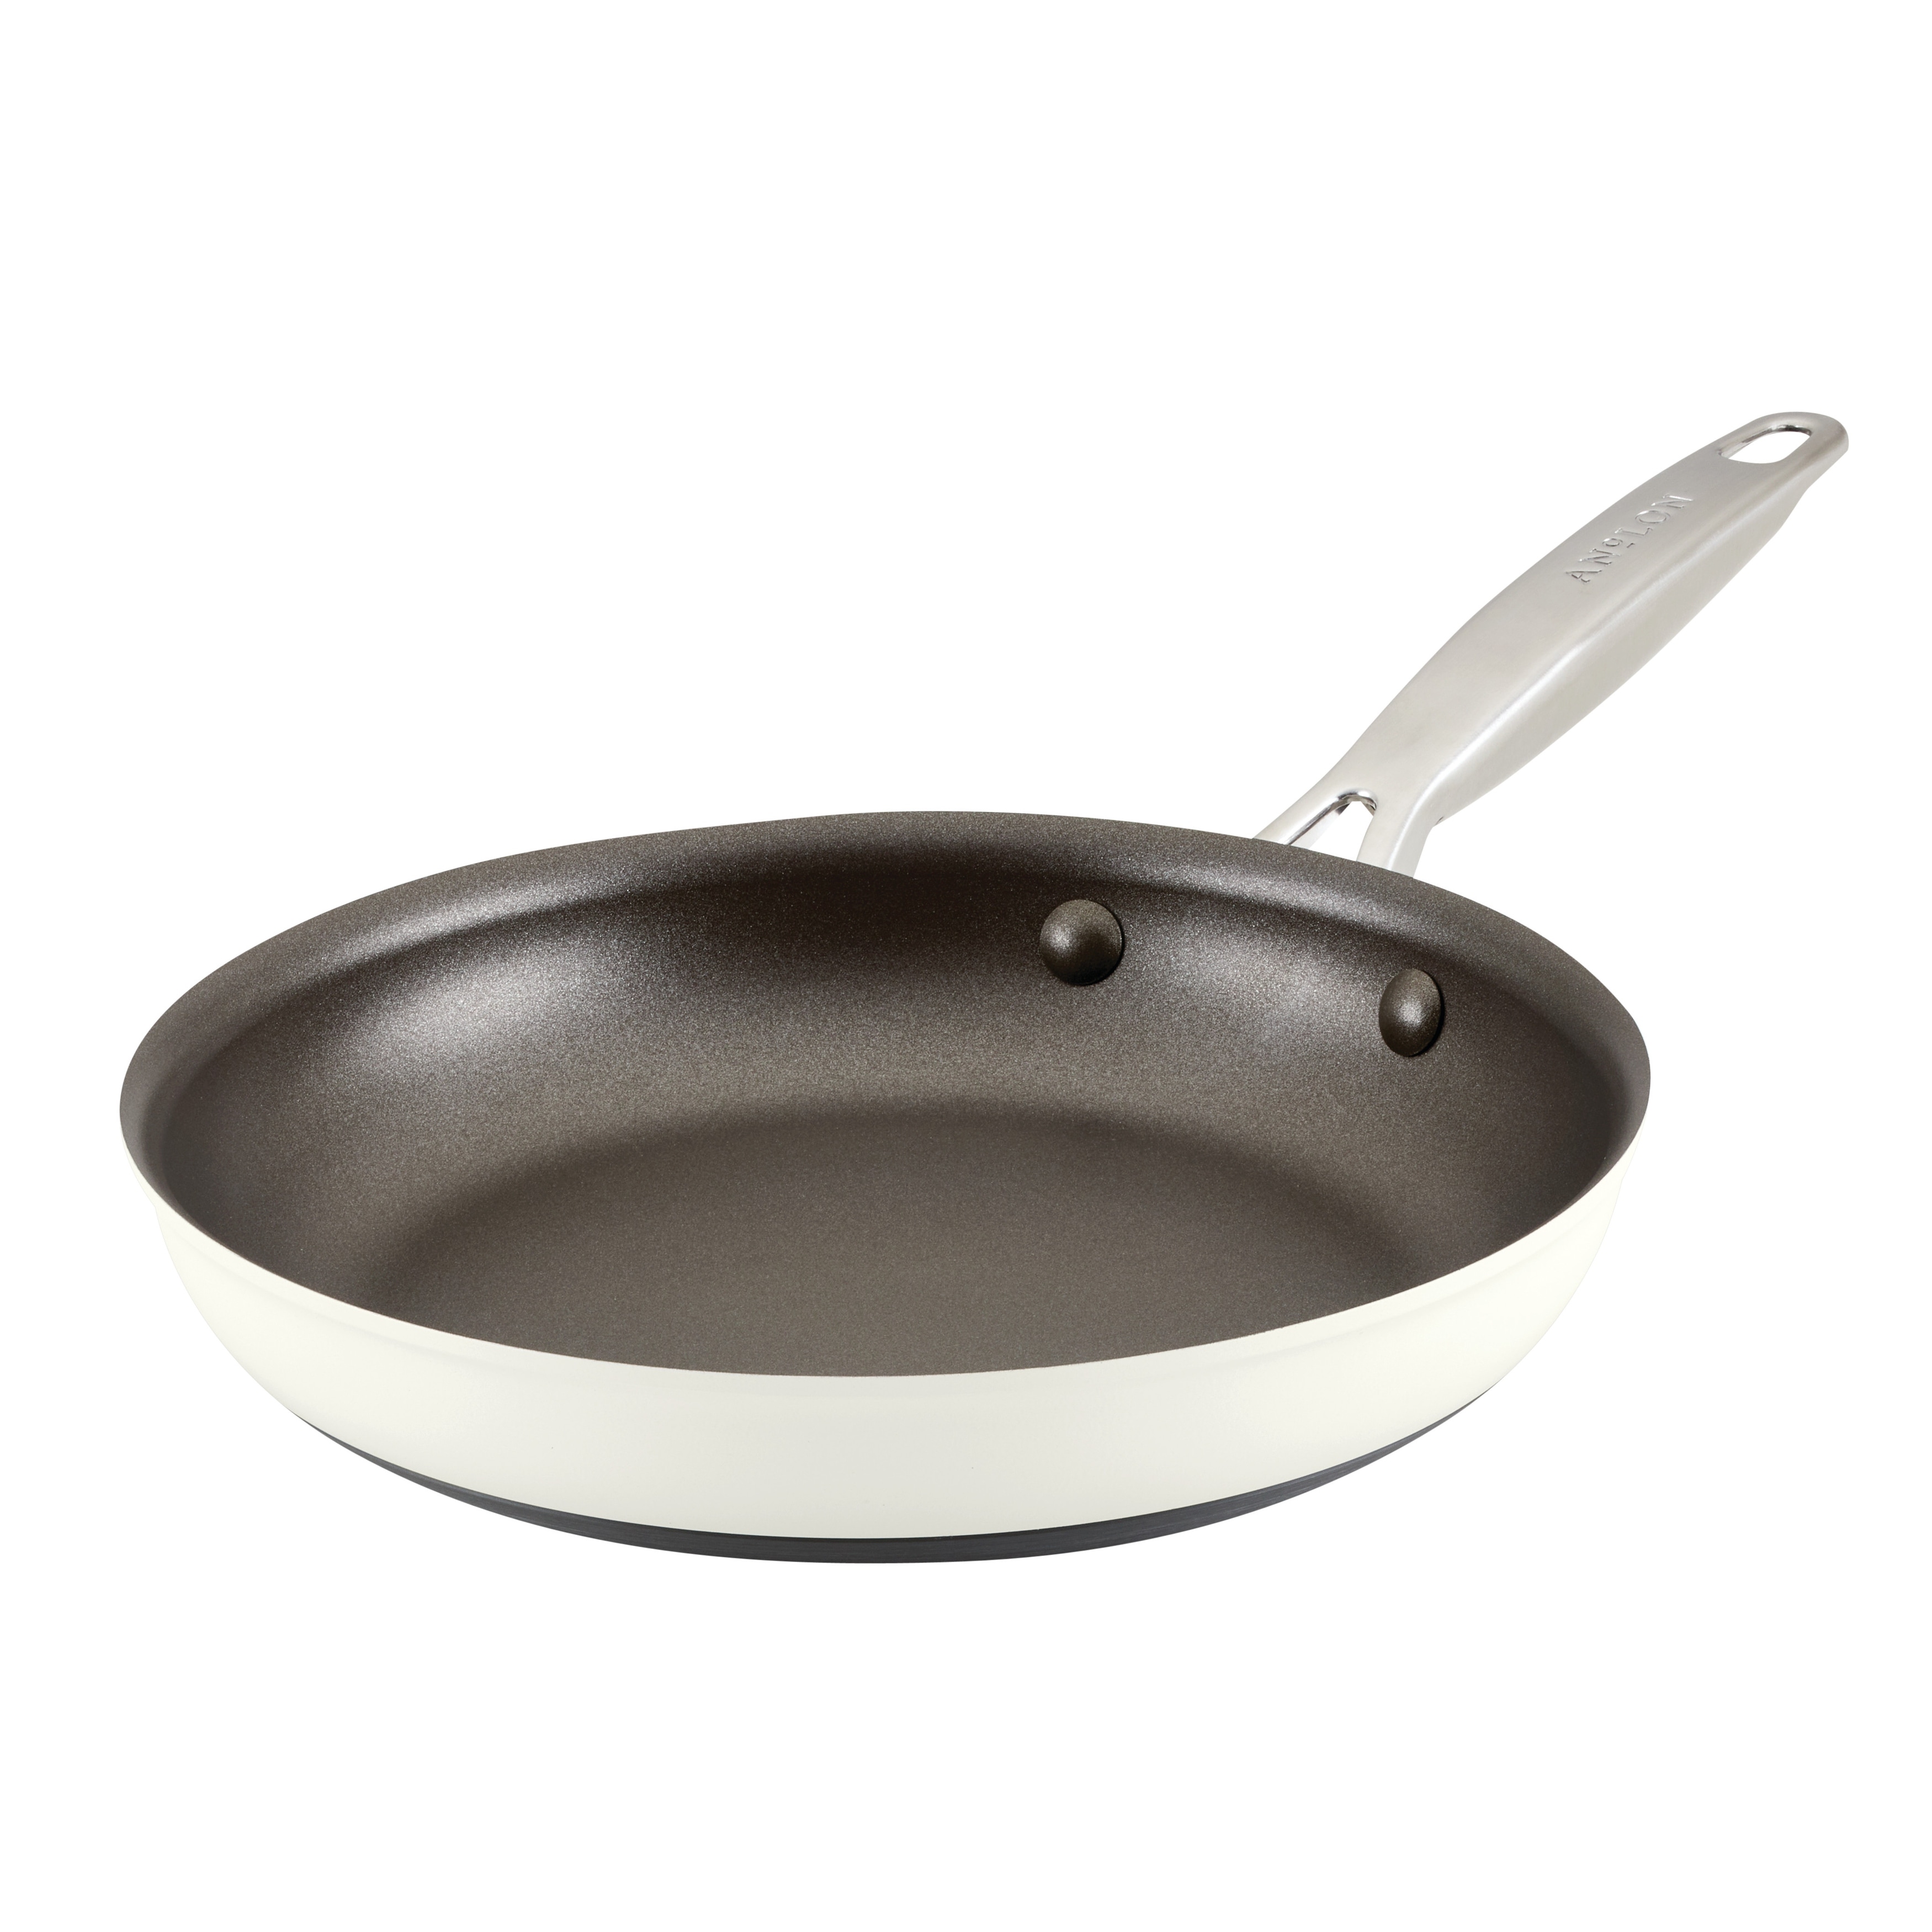 https://ak1.ostkcdn.com/images/products/is/images/direct/a61efd088bd7838d463ee5ef716c36869cc11805/Anolon-Achieve-Hard-Anodized-Nonstick-Frying-Pan%2C-12-Inch.jpg